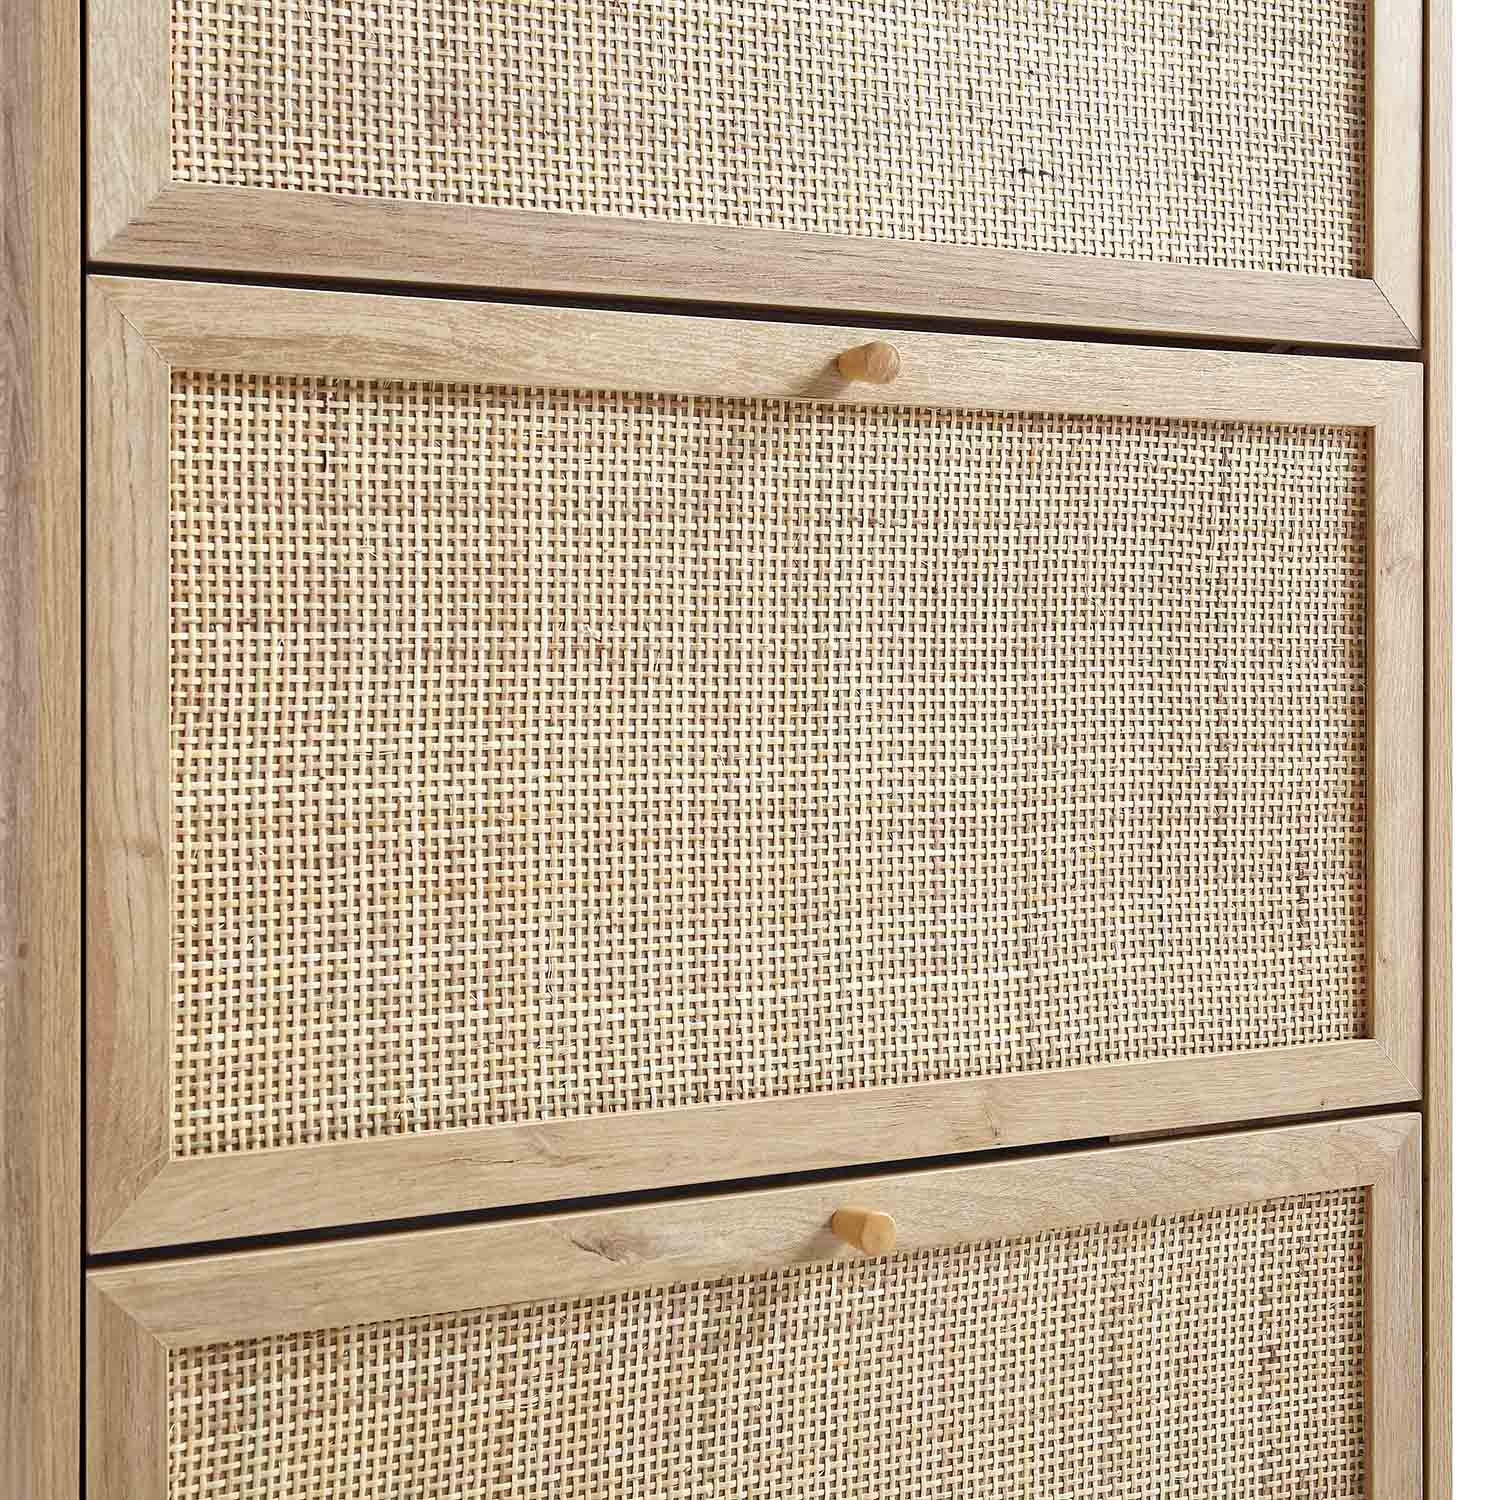 Home Basics SS34063 Shoe Cabinet, 6 Tier, Natural